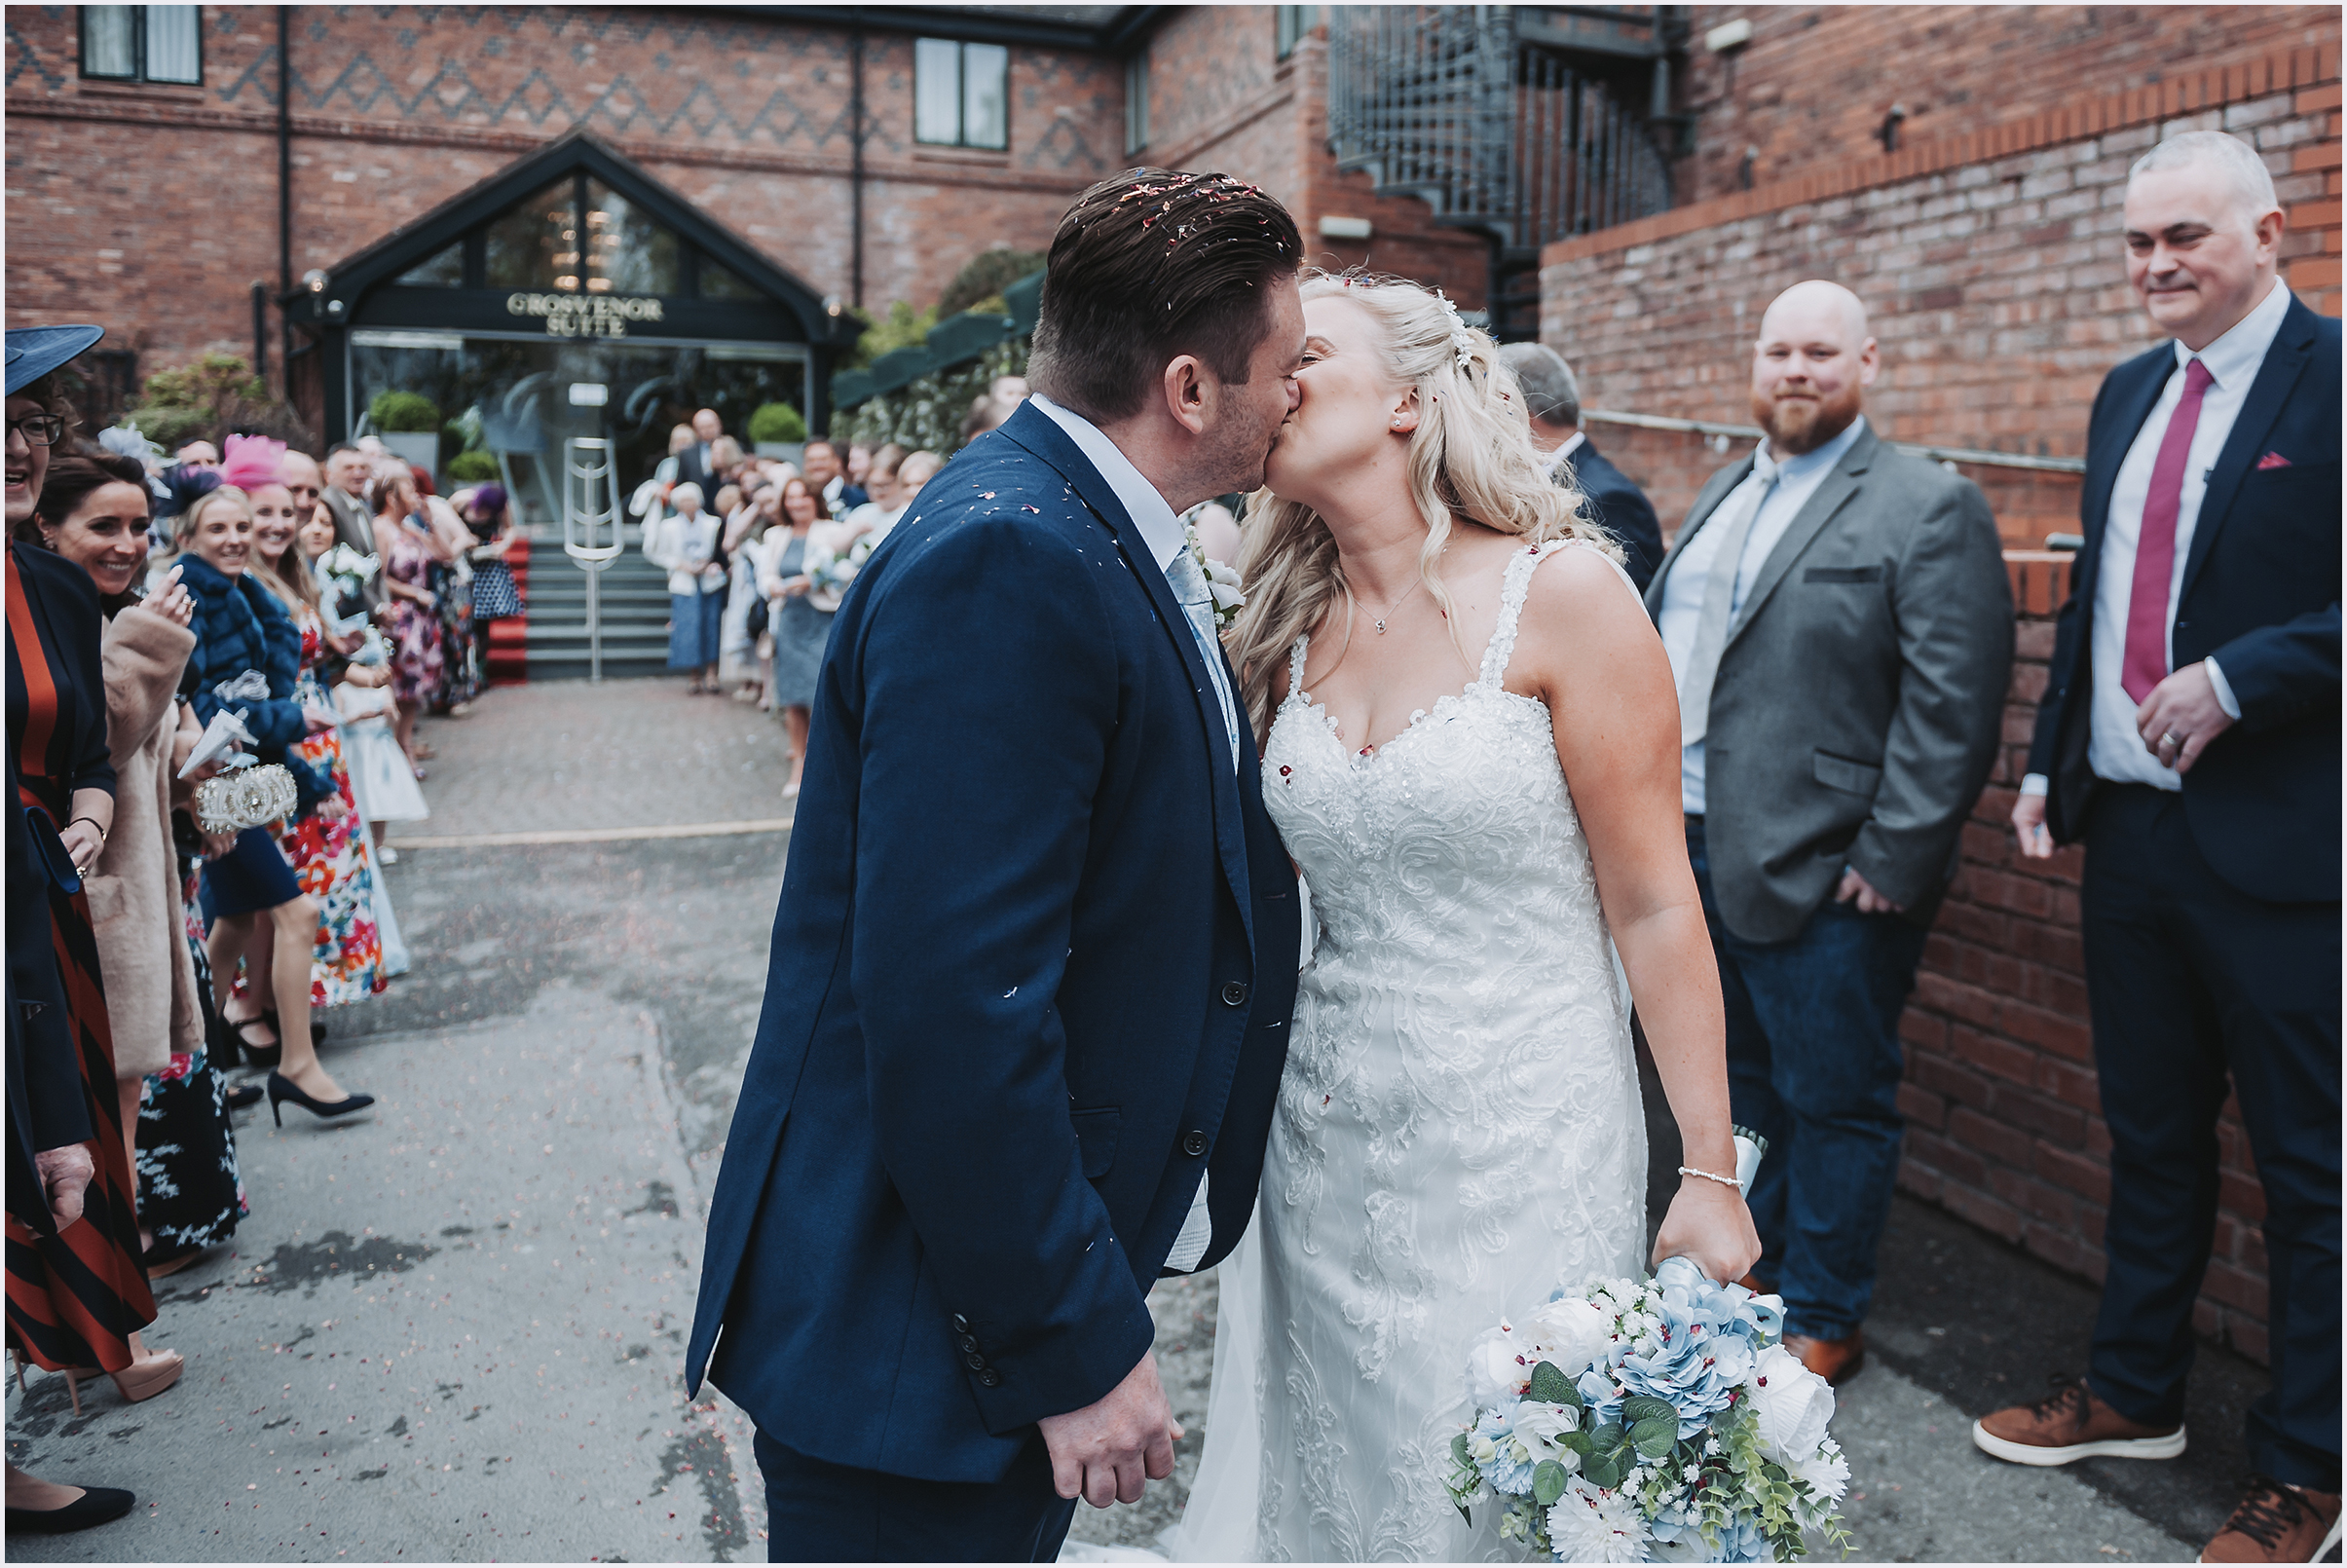 A couple kiss after their confetti shot at The Grosvenor Pulford Hotel and Spa.